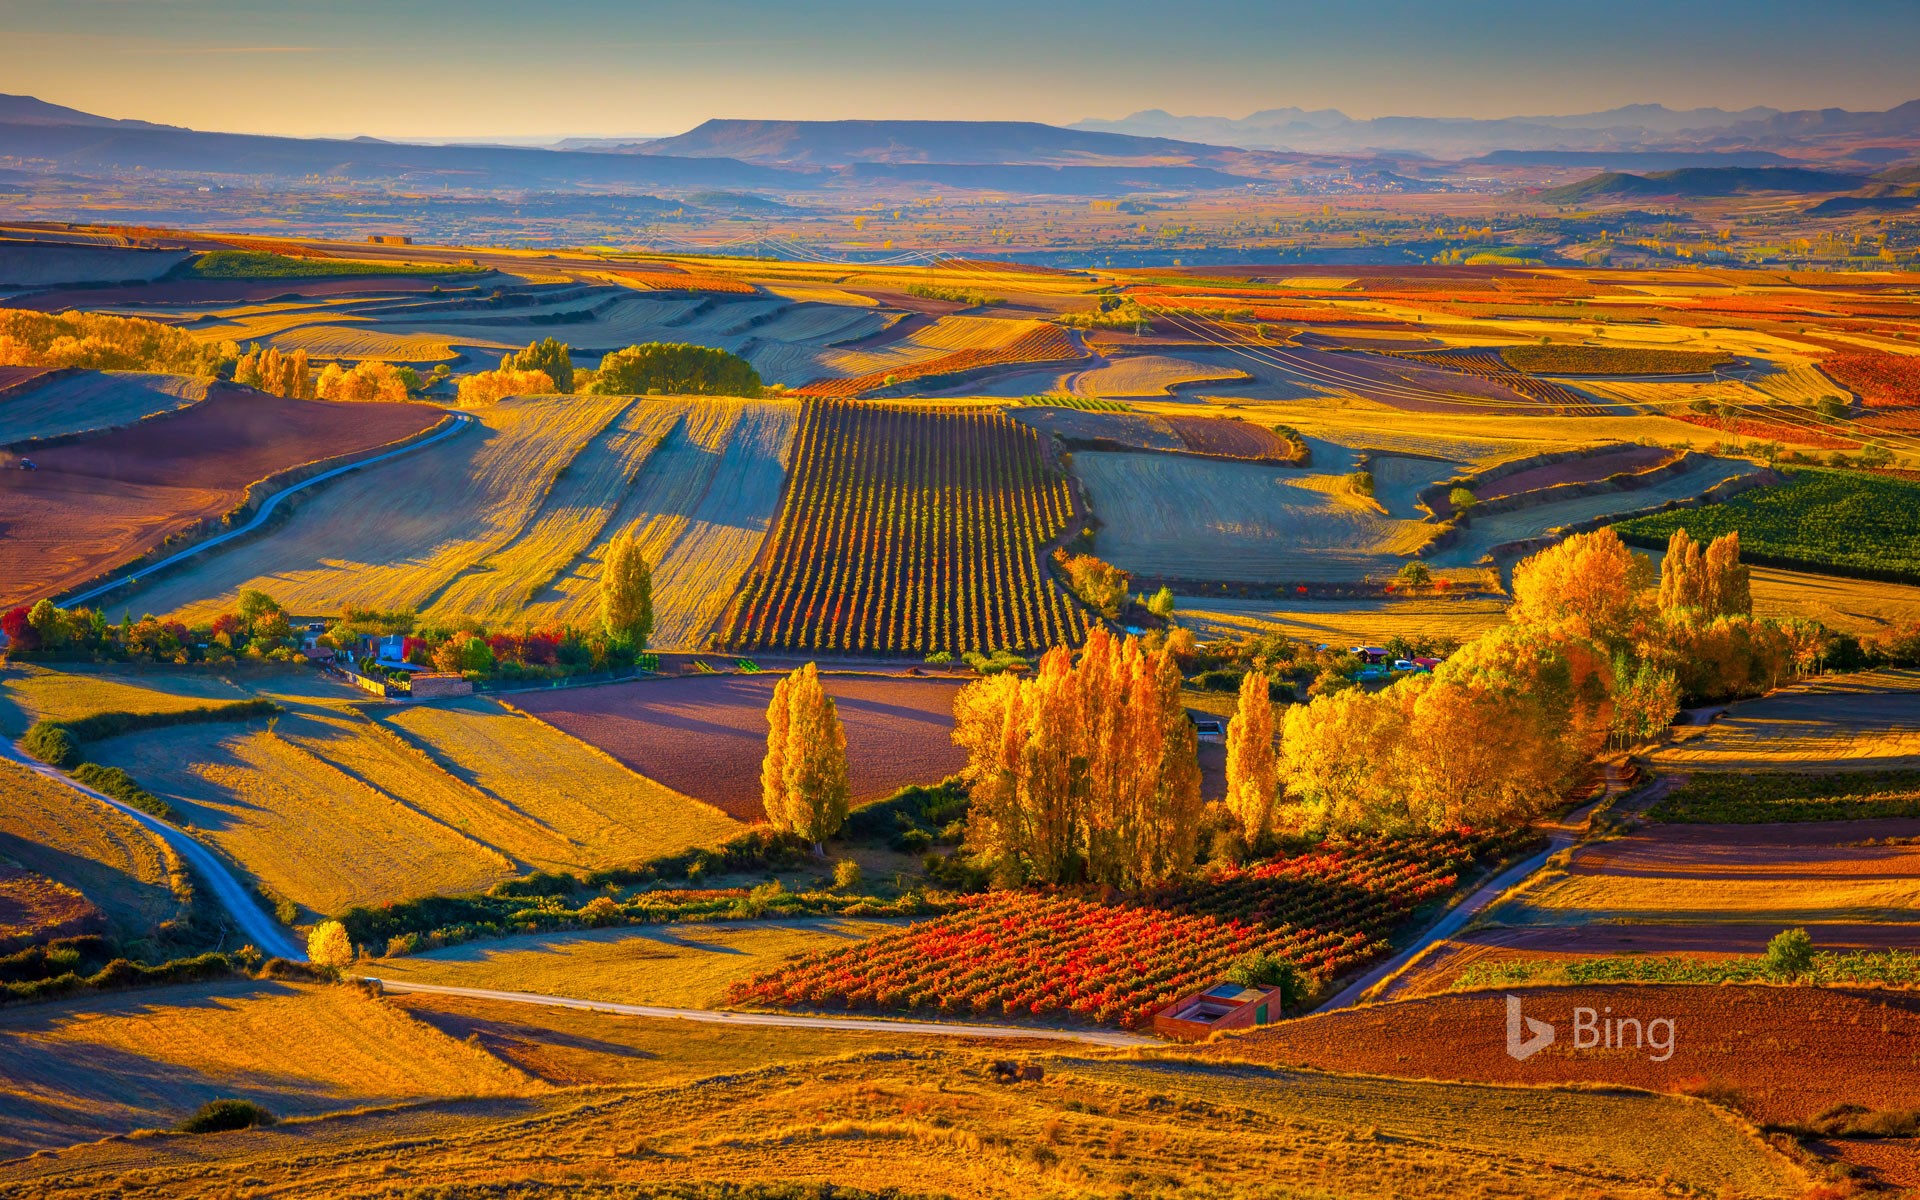 Autumnal landscape near the town of Clavijo in Spain's Rioja district